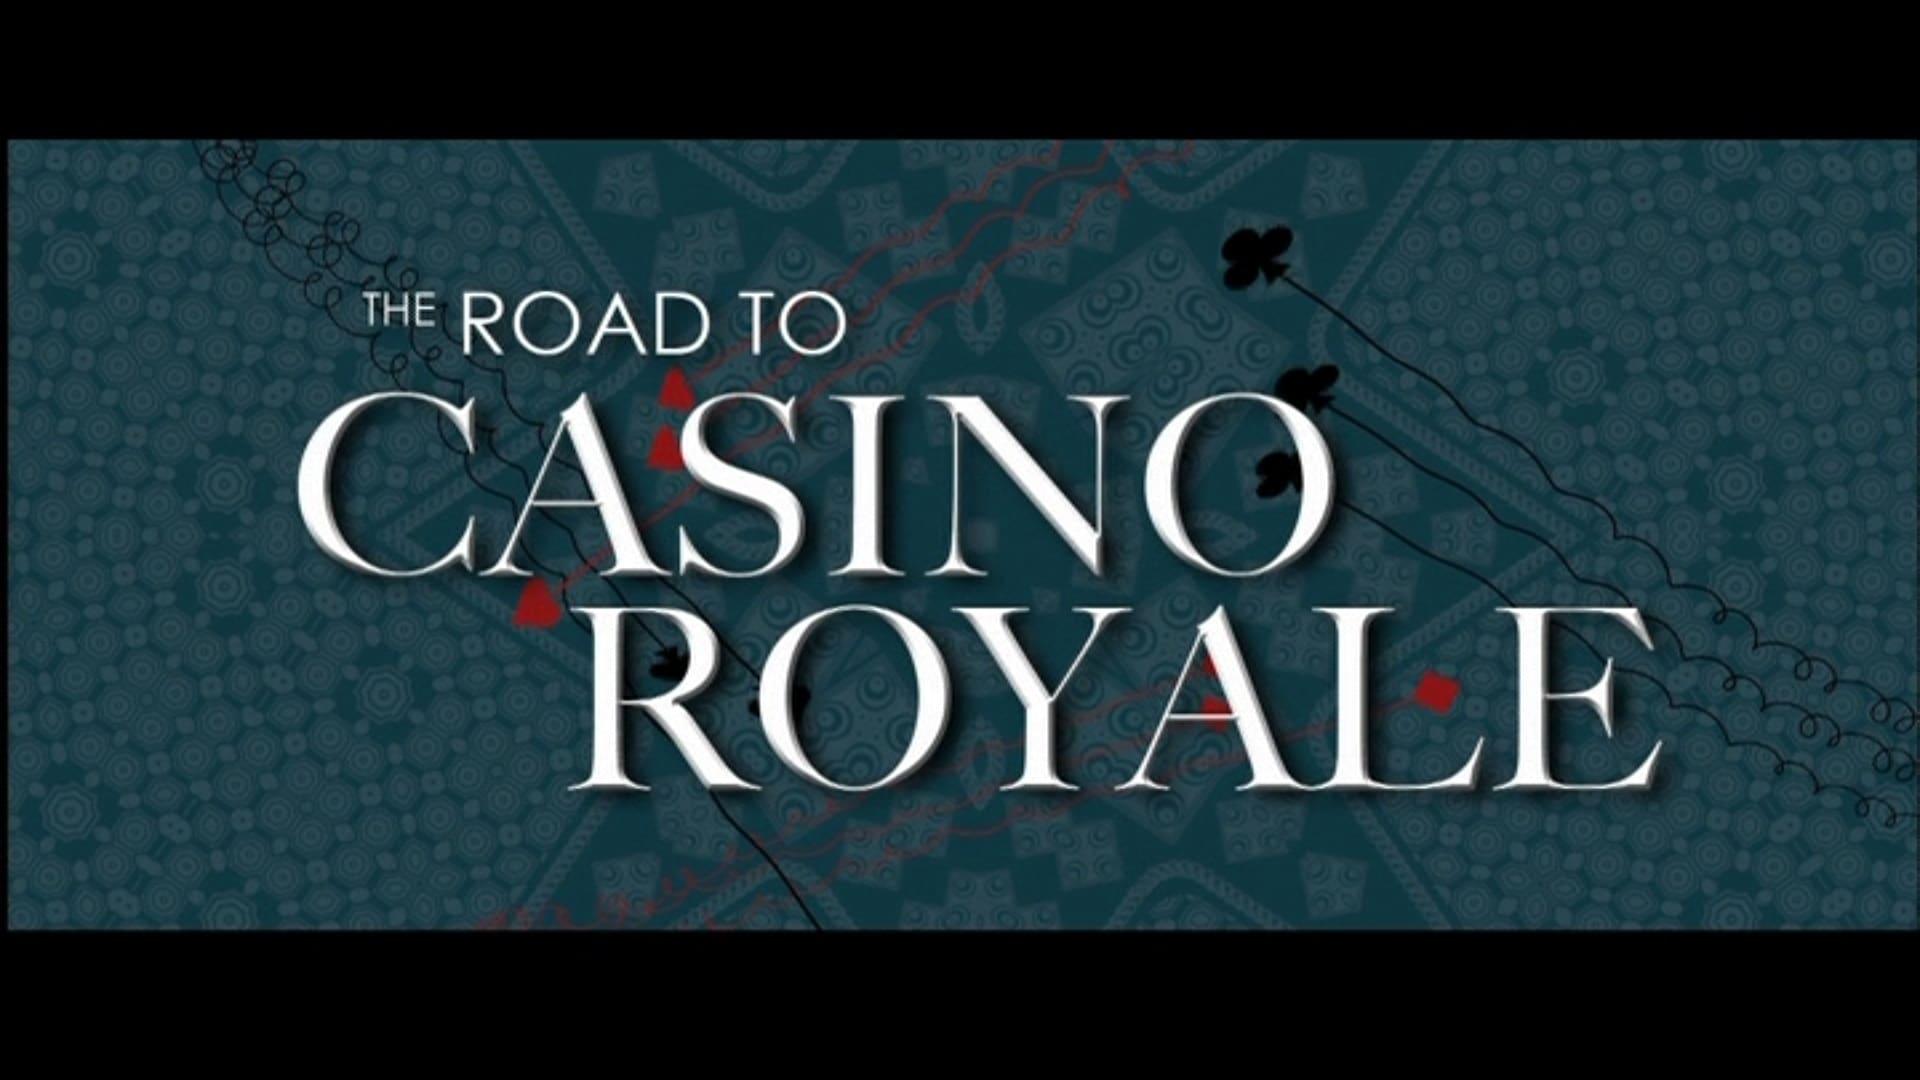 The Road to Casino Royale backdrop